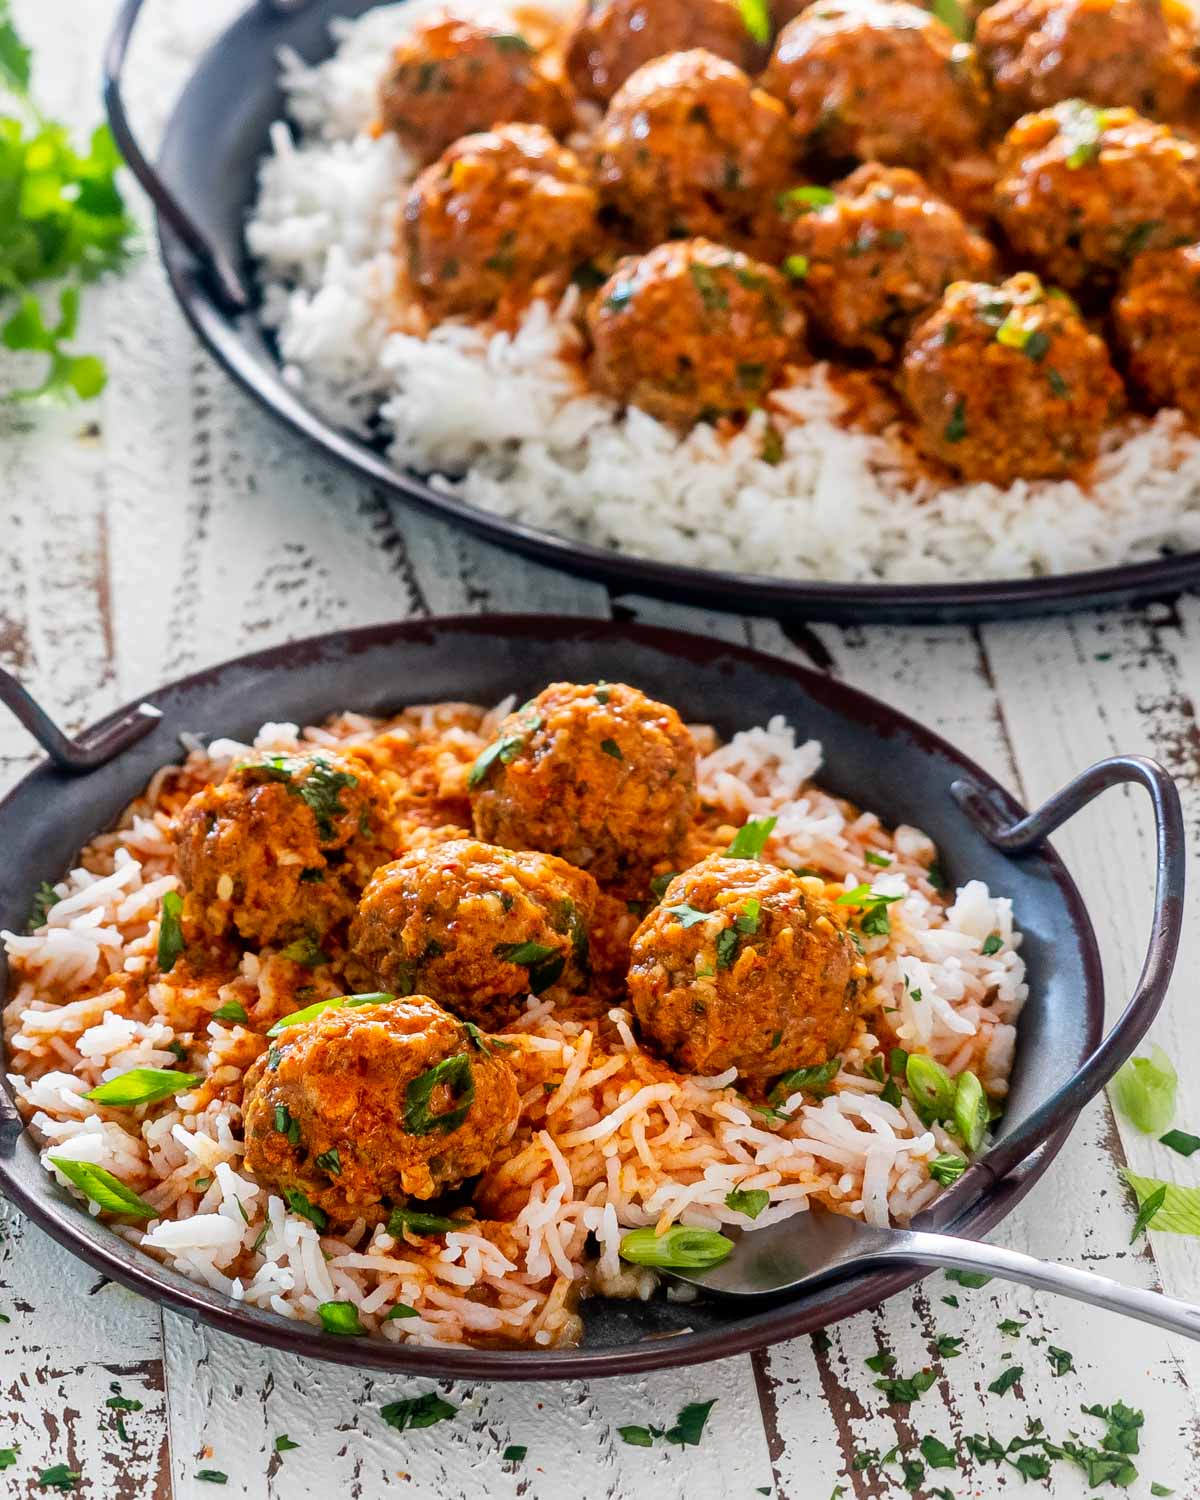 a serving of red curry turkey meatballs over a bed of rice in a metal plate.